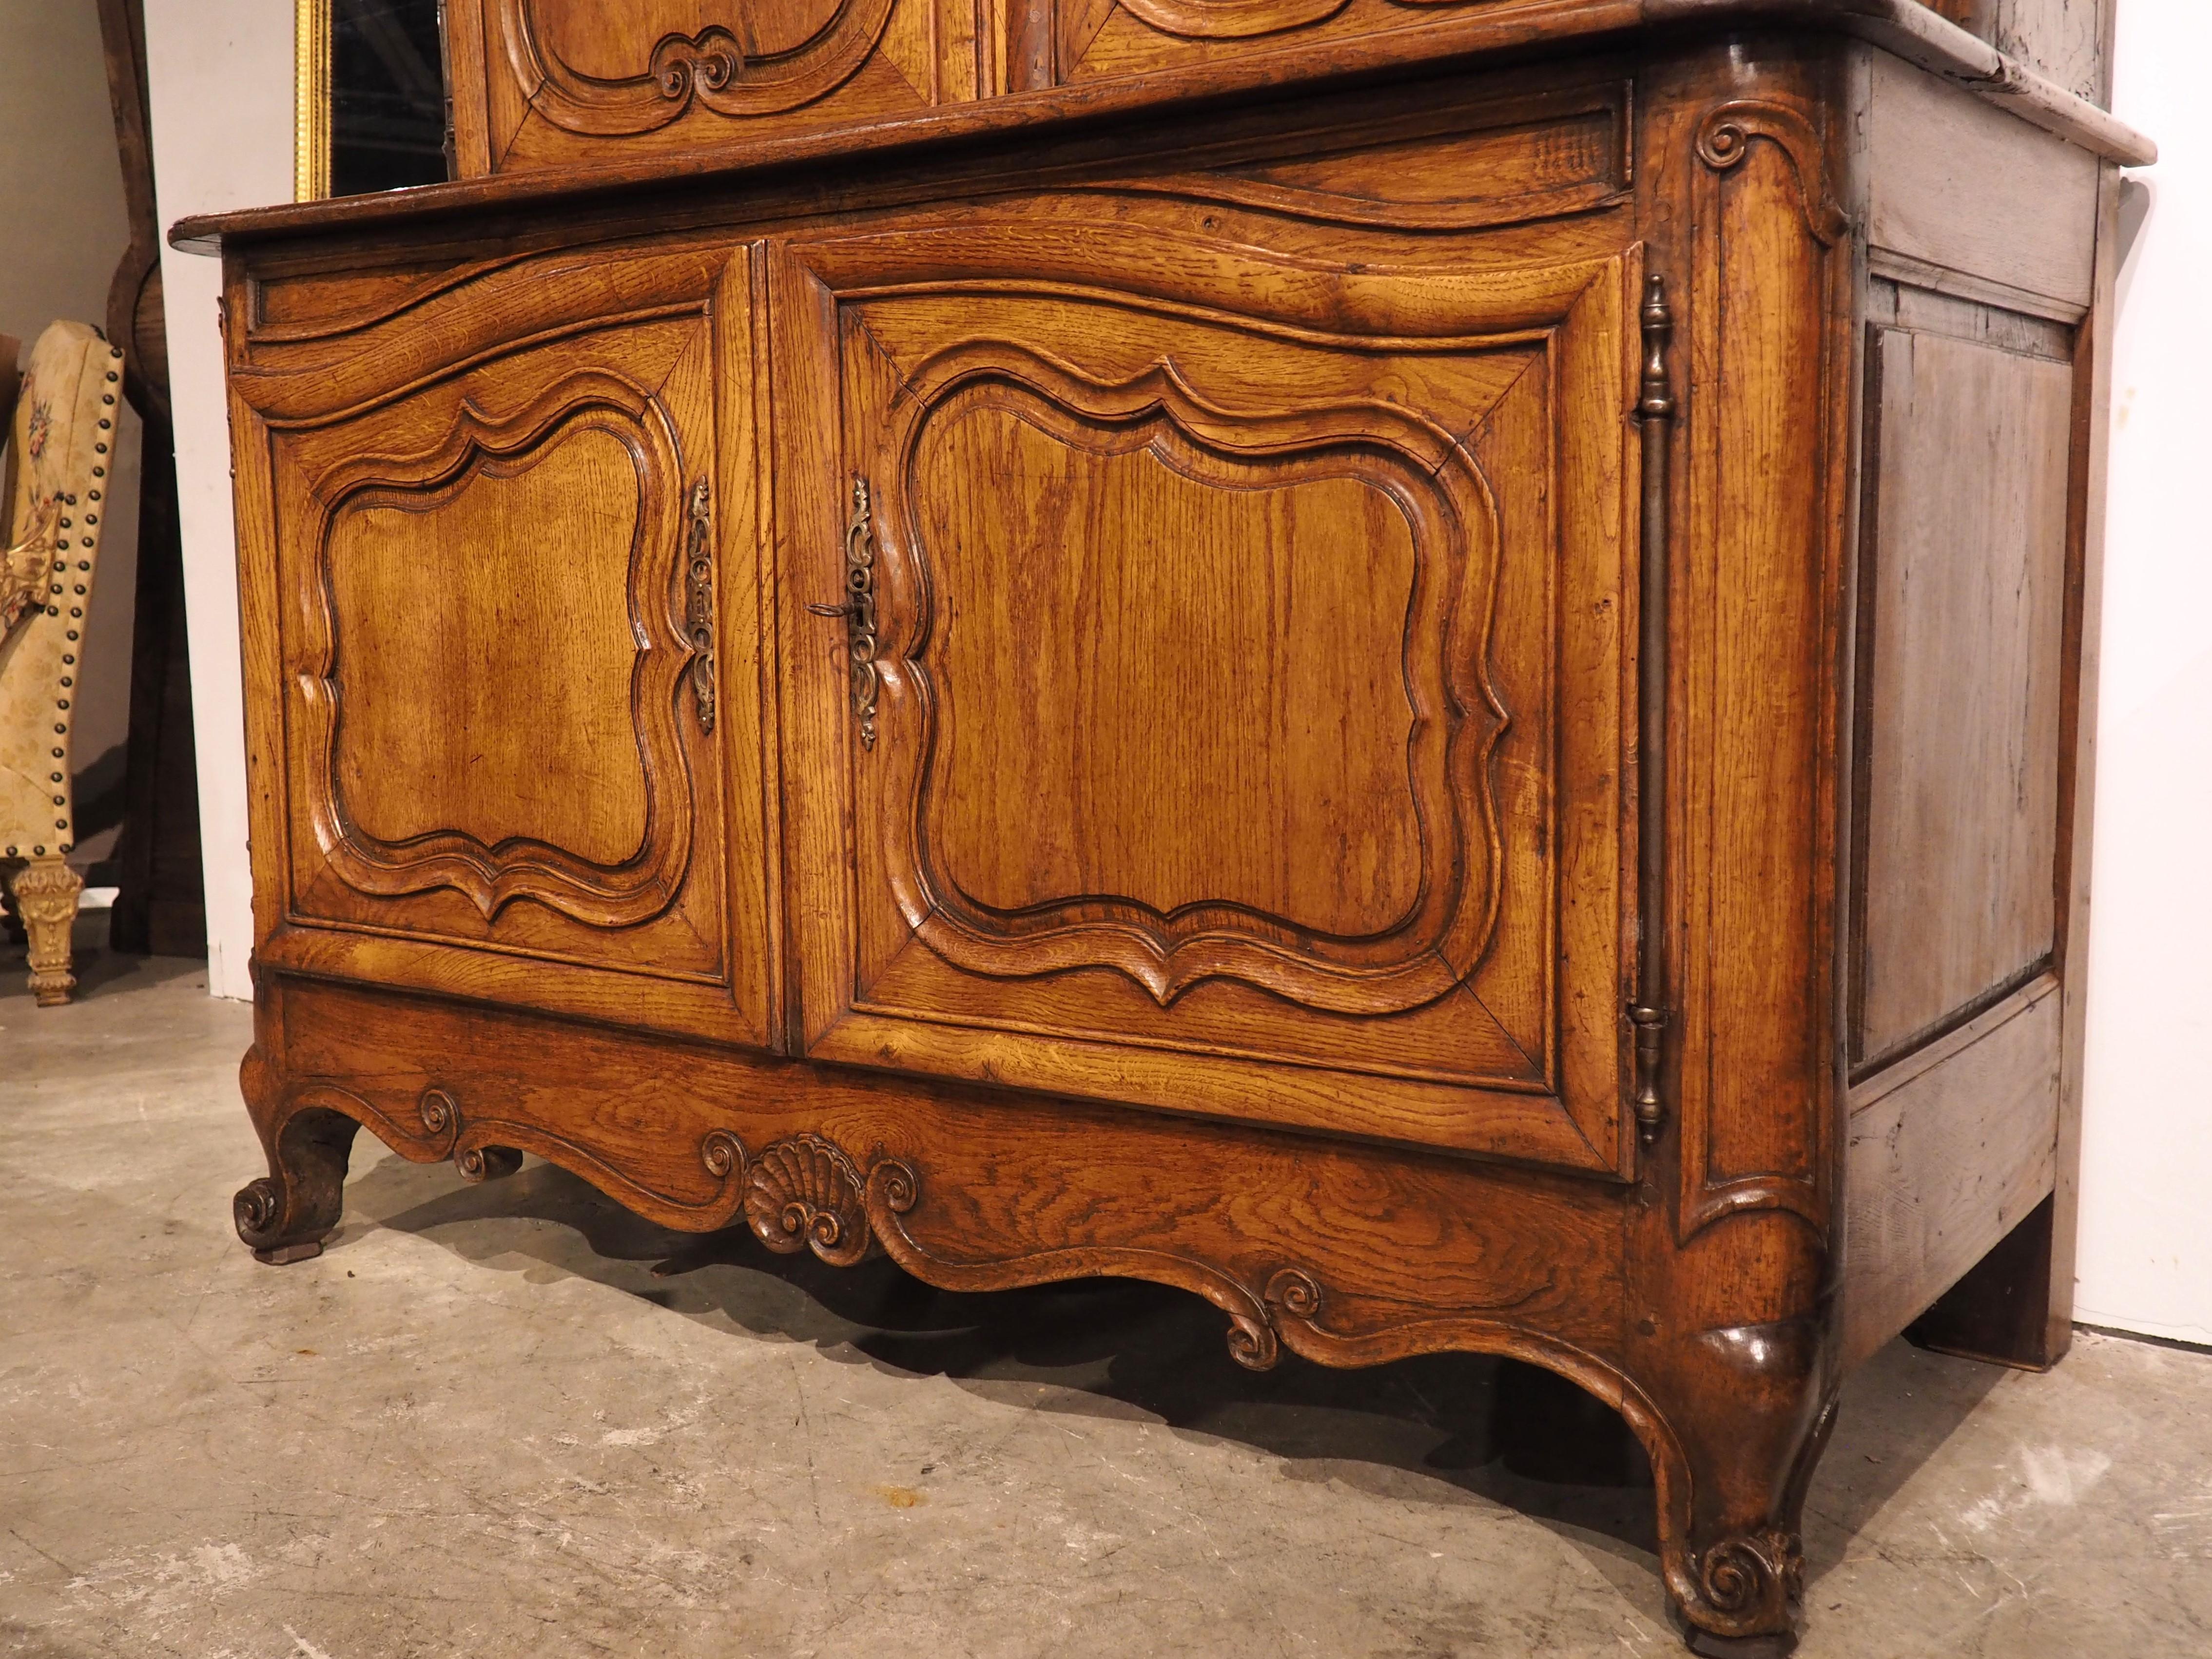 A Grand 18th Century French Oak Buffet Deux Corps from the Perche Region In Good Condition For Sale In Dallas, TX